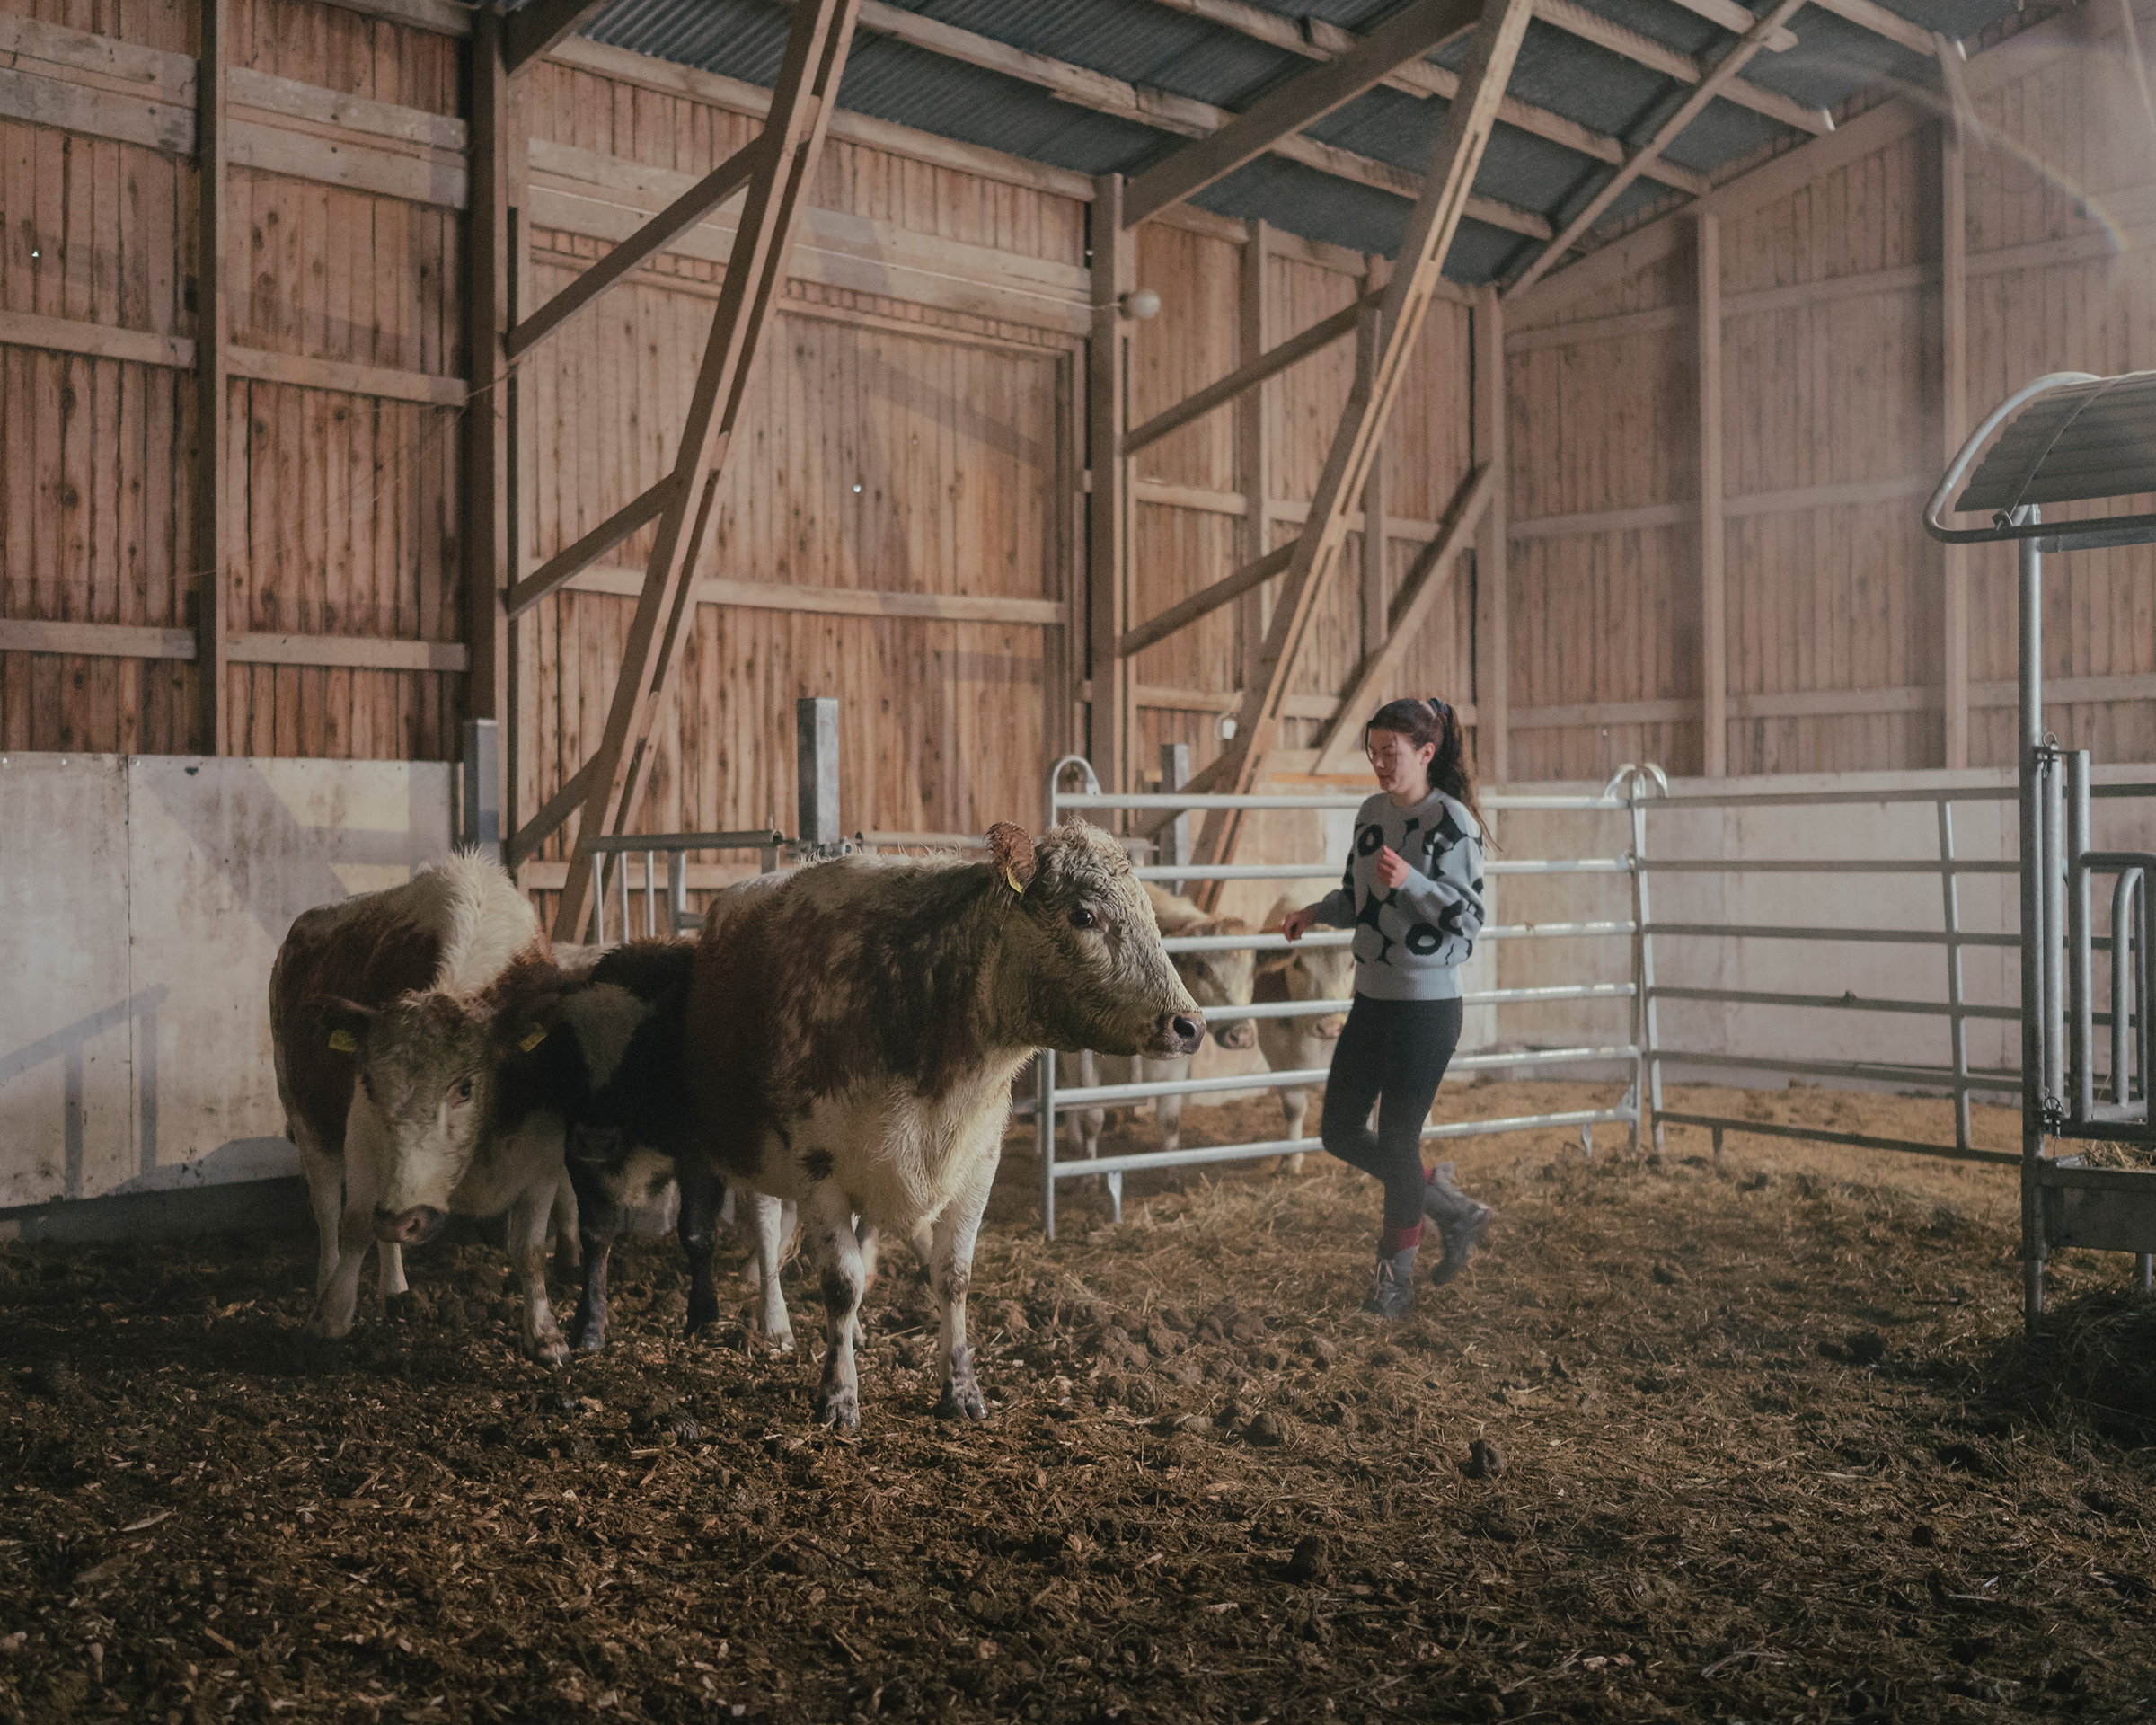 Marja Oesch practices regeneration on her Finnish farm, with the help of cattle. She hopes to put back as much into the land as she takes out (Ingmar Björn Nolting for TIME)